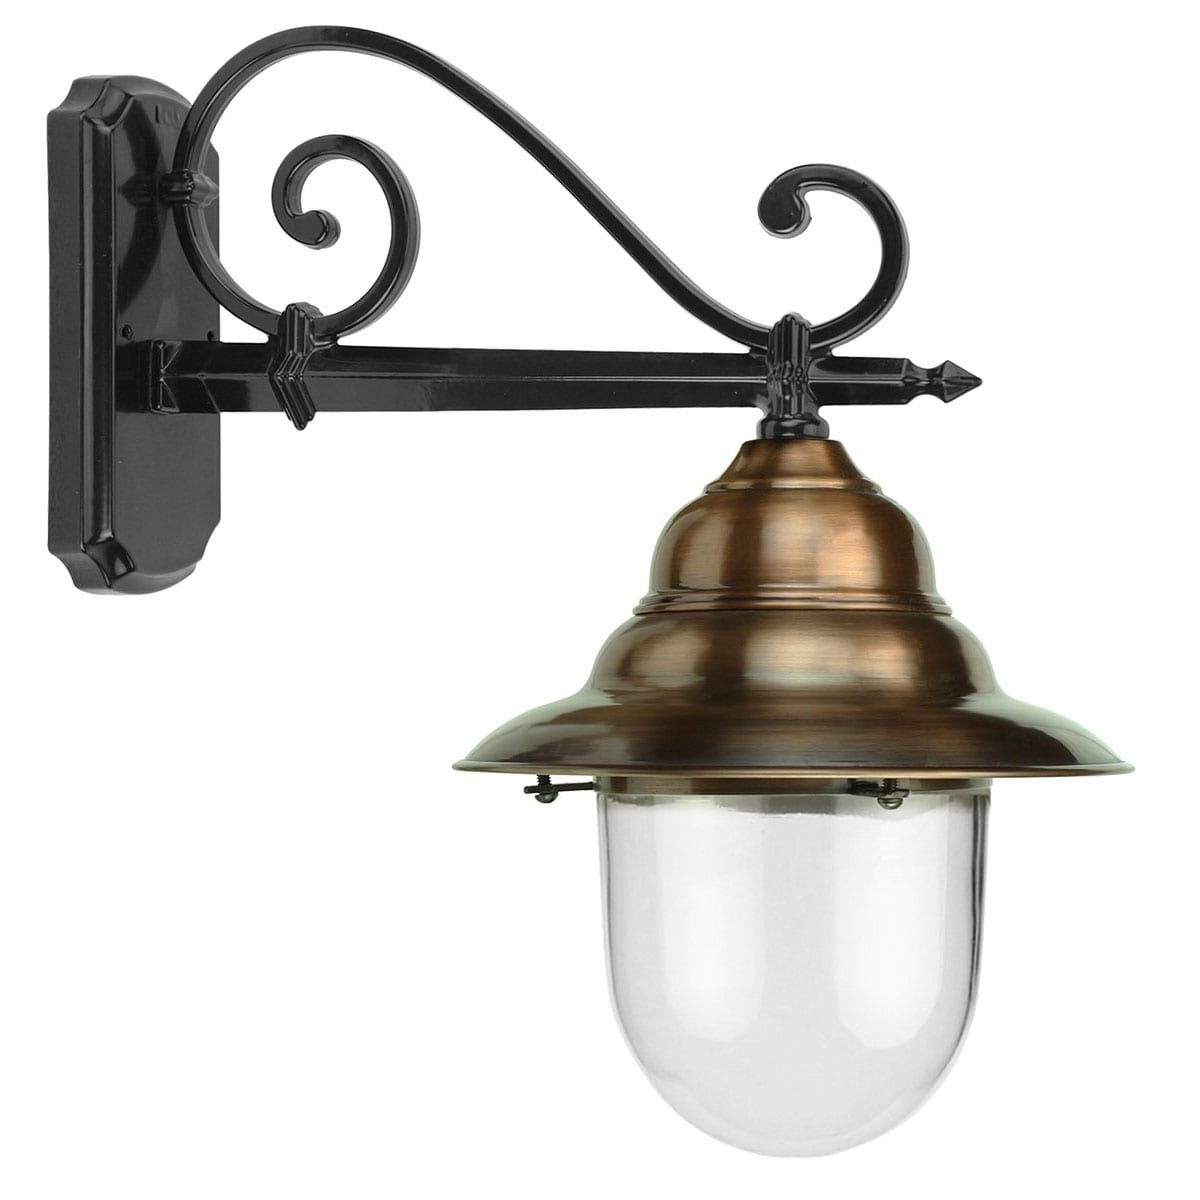 Outdoor Lamps Classic Rural Wall lamp industrial copper Weerselo - 57 cm